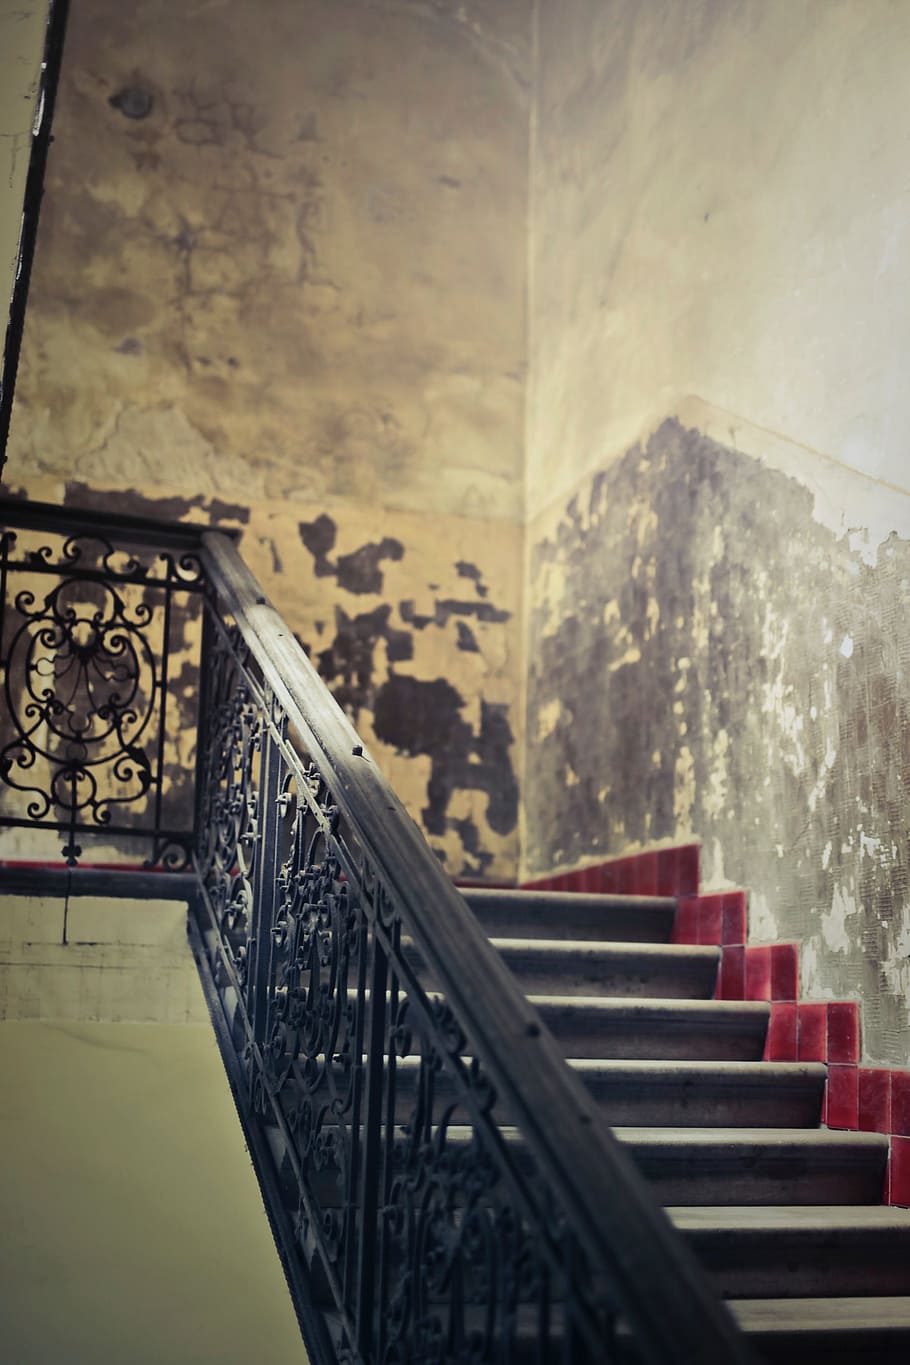 old, staircase, metal railings, tiles, architectural, architecture, art, indoors, mansion, railing